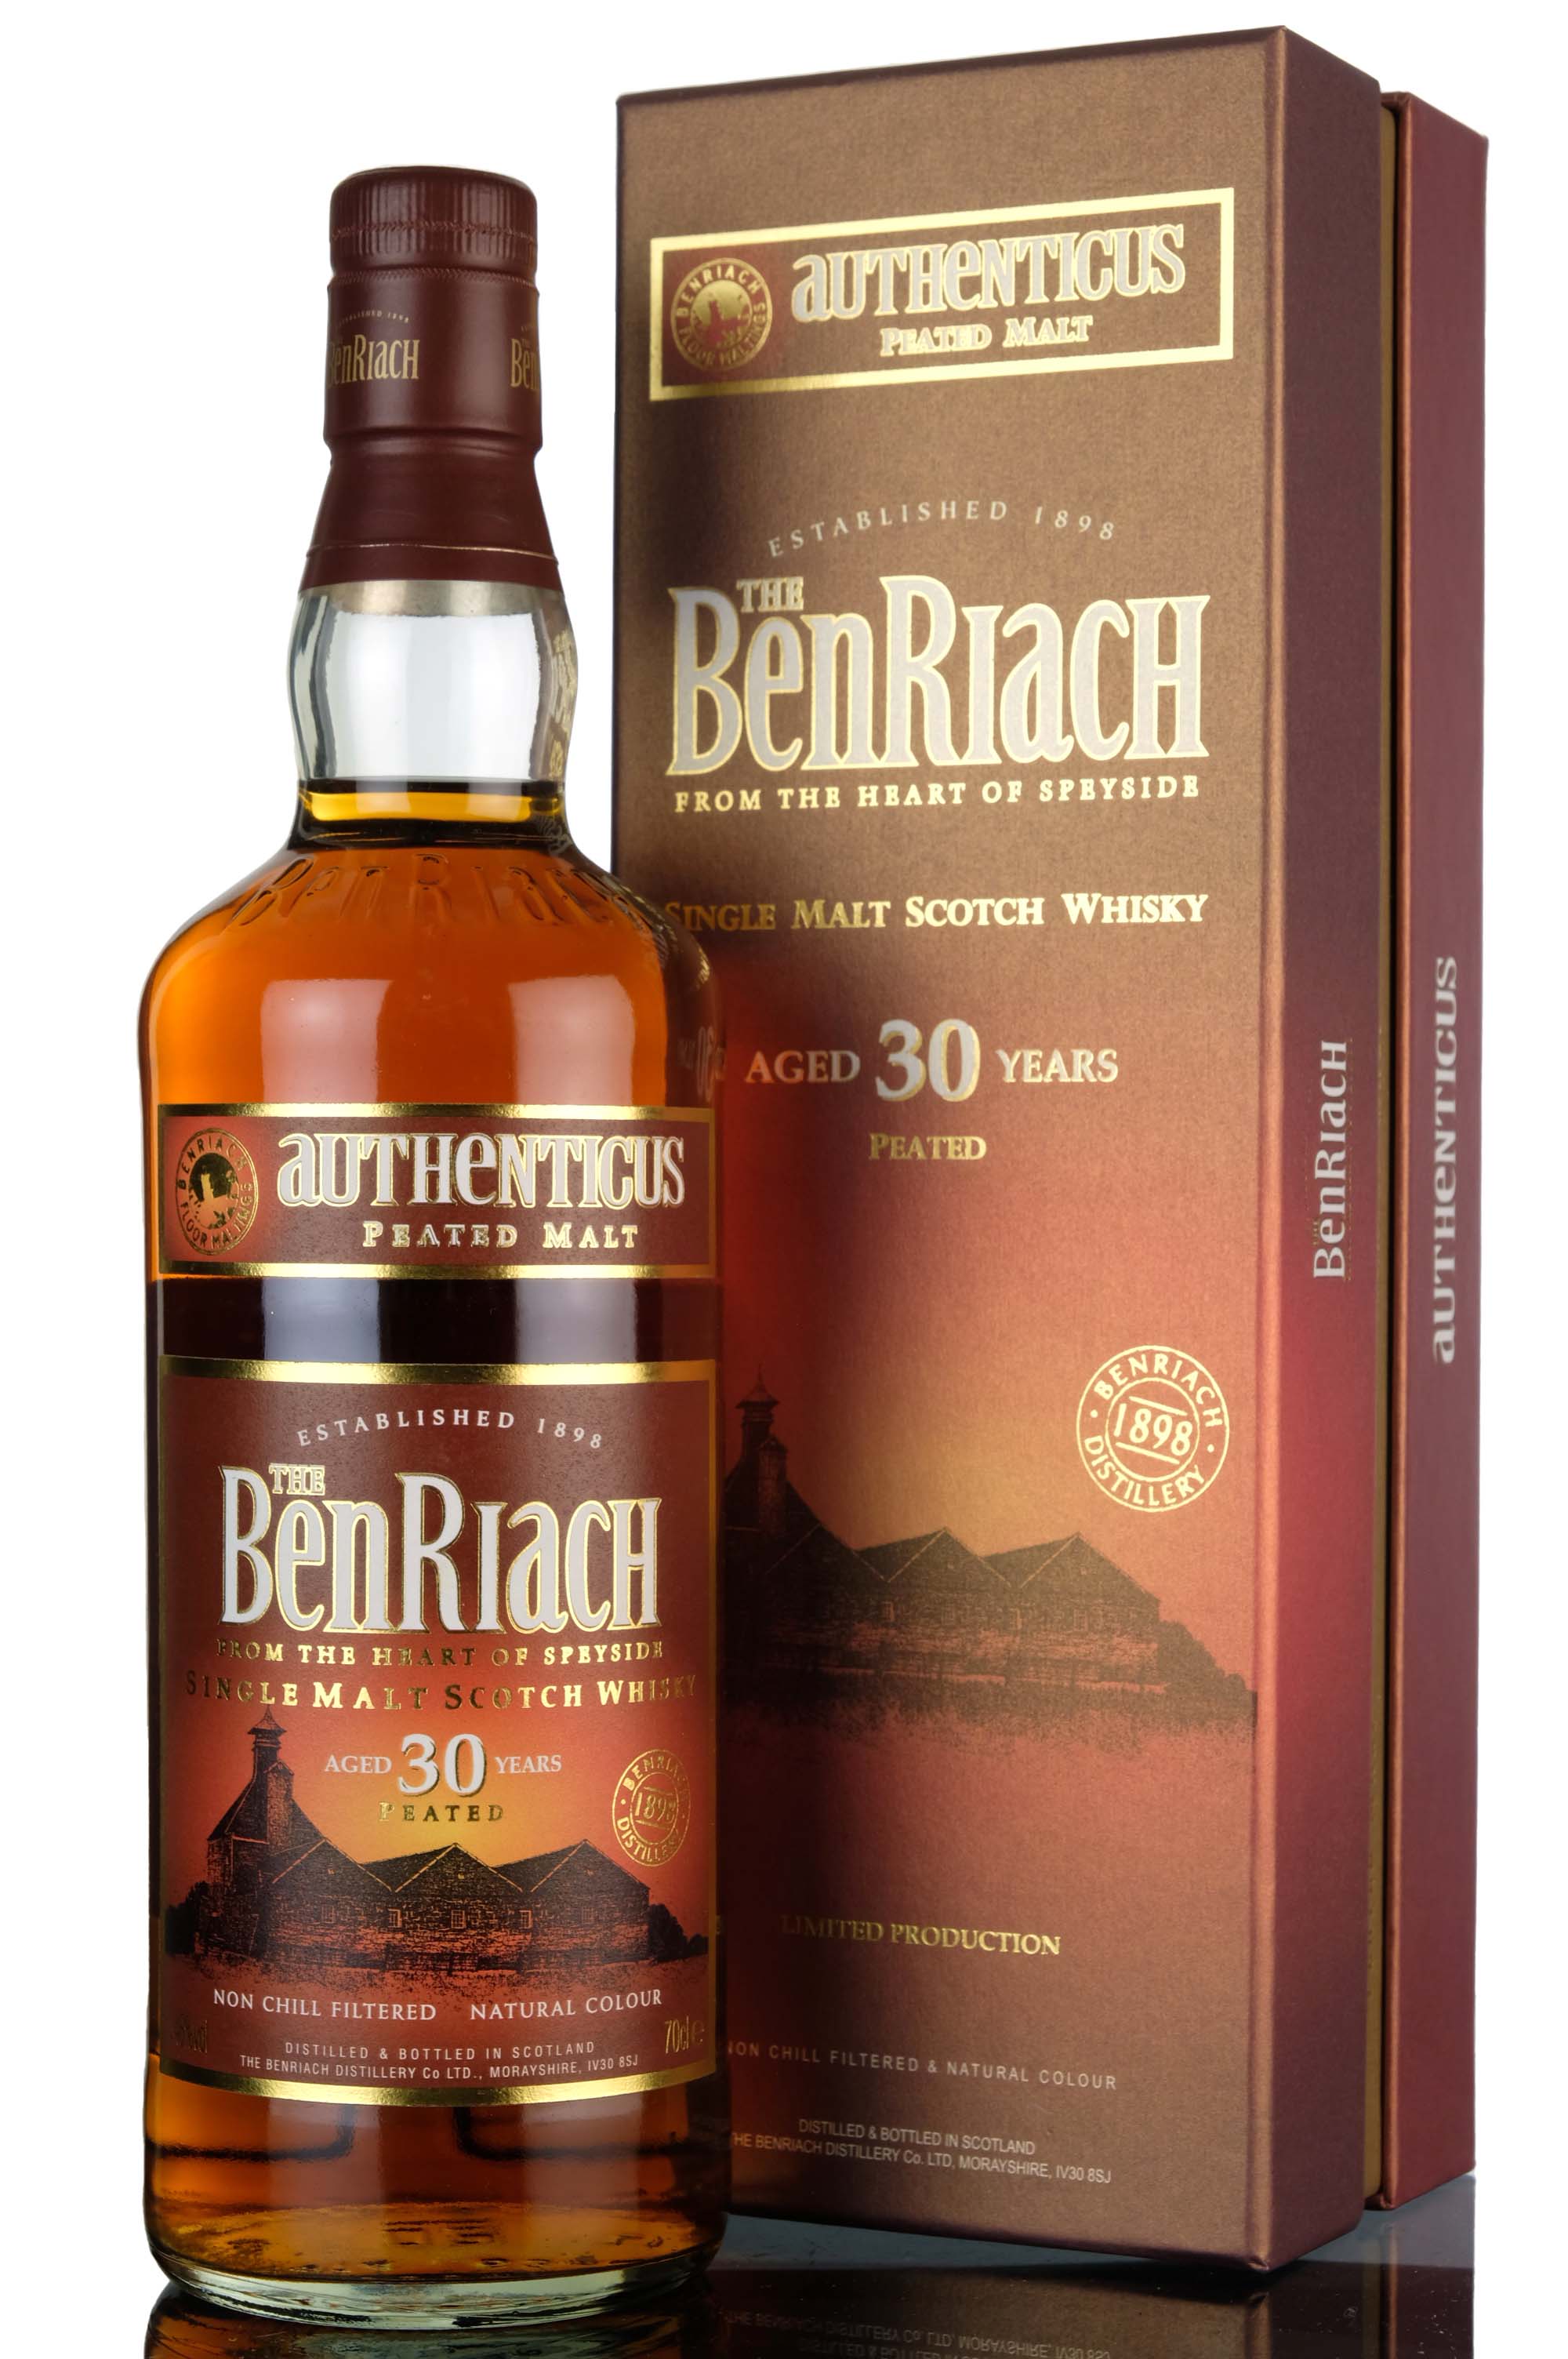 Benriach 30 Year Old - Authenticus - 2016 Release